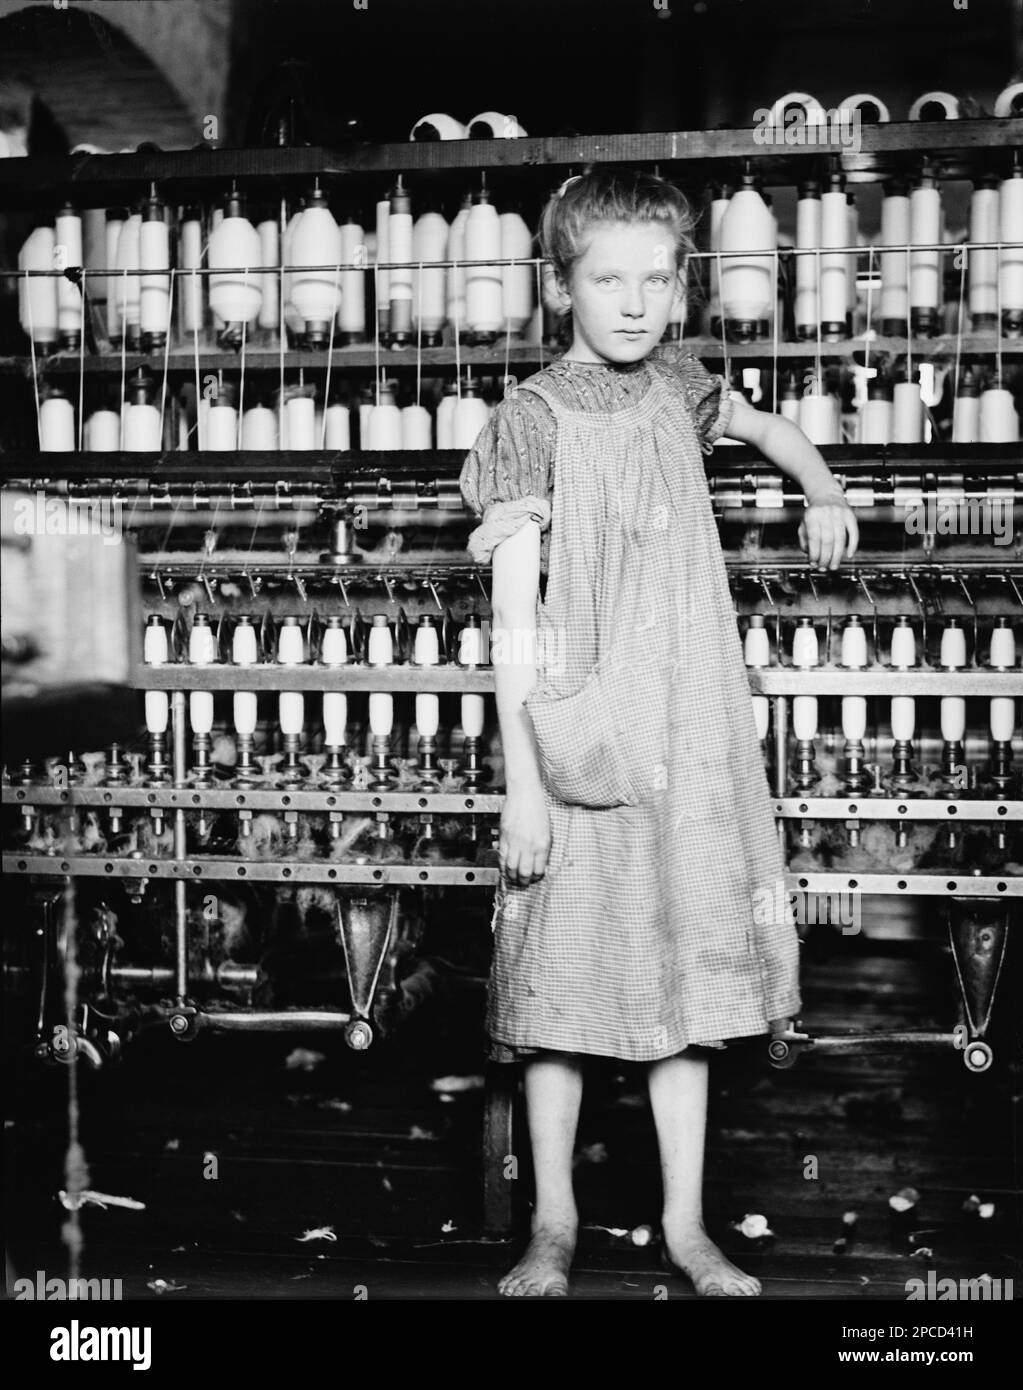 1910 february , North Pownal , Vermont , USA :  Addie Card , 12 years.  Spinner in North Pownal  Cotton Mill. Vt.  Location: North Pownal , Vermont .  Photo taken by celebrated american photographer and sociologist LEWIS HINE   ( 1874 - 1940 ) for the Children's Bureau of US Govern . Hine used his camera as a tool for social reform.   - BAMBINI -  BAMBINA - LAVORATORI - BAMBINO IN FABBRICA - CHILDREN WORKERS - FACTORY - CHILDHOOD - INFANZIA - LAVORO MINORILE - LAVORO - WORK - LAVORATORE - WORKER - OPERAIO -  CLASSE OPERAIA LAVORATRICE - WORKING CLASS - OPERAI - LAVORATORI - LAVORO - FILATOIO - Stock Photo